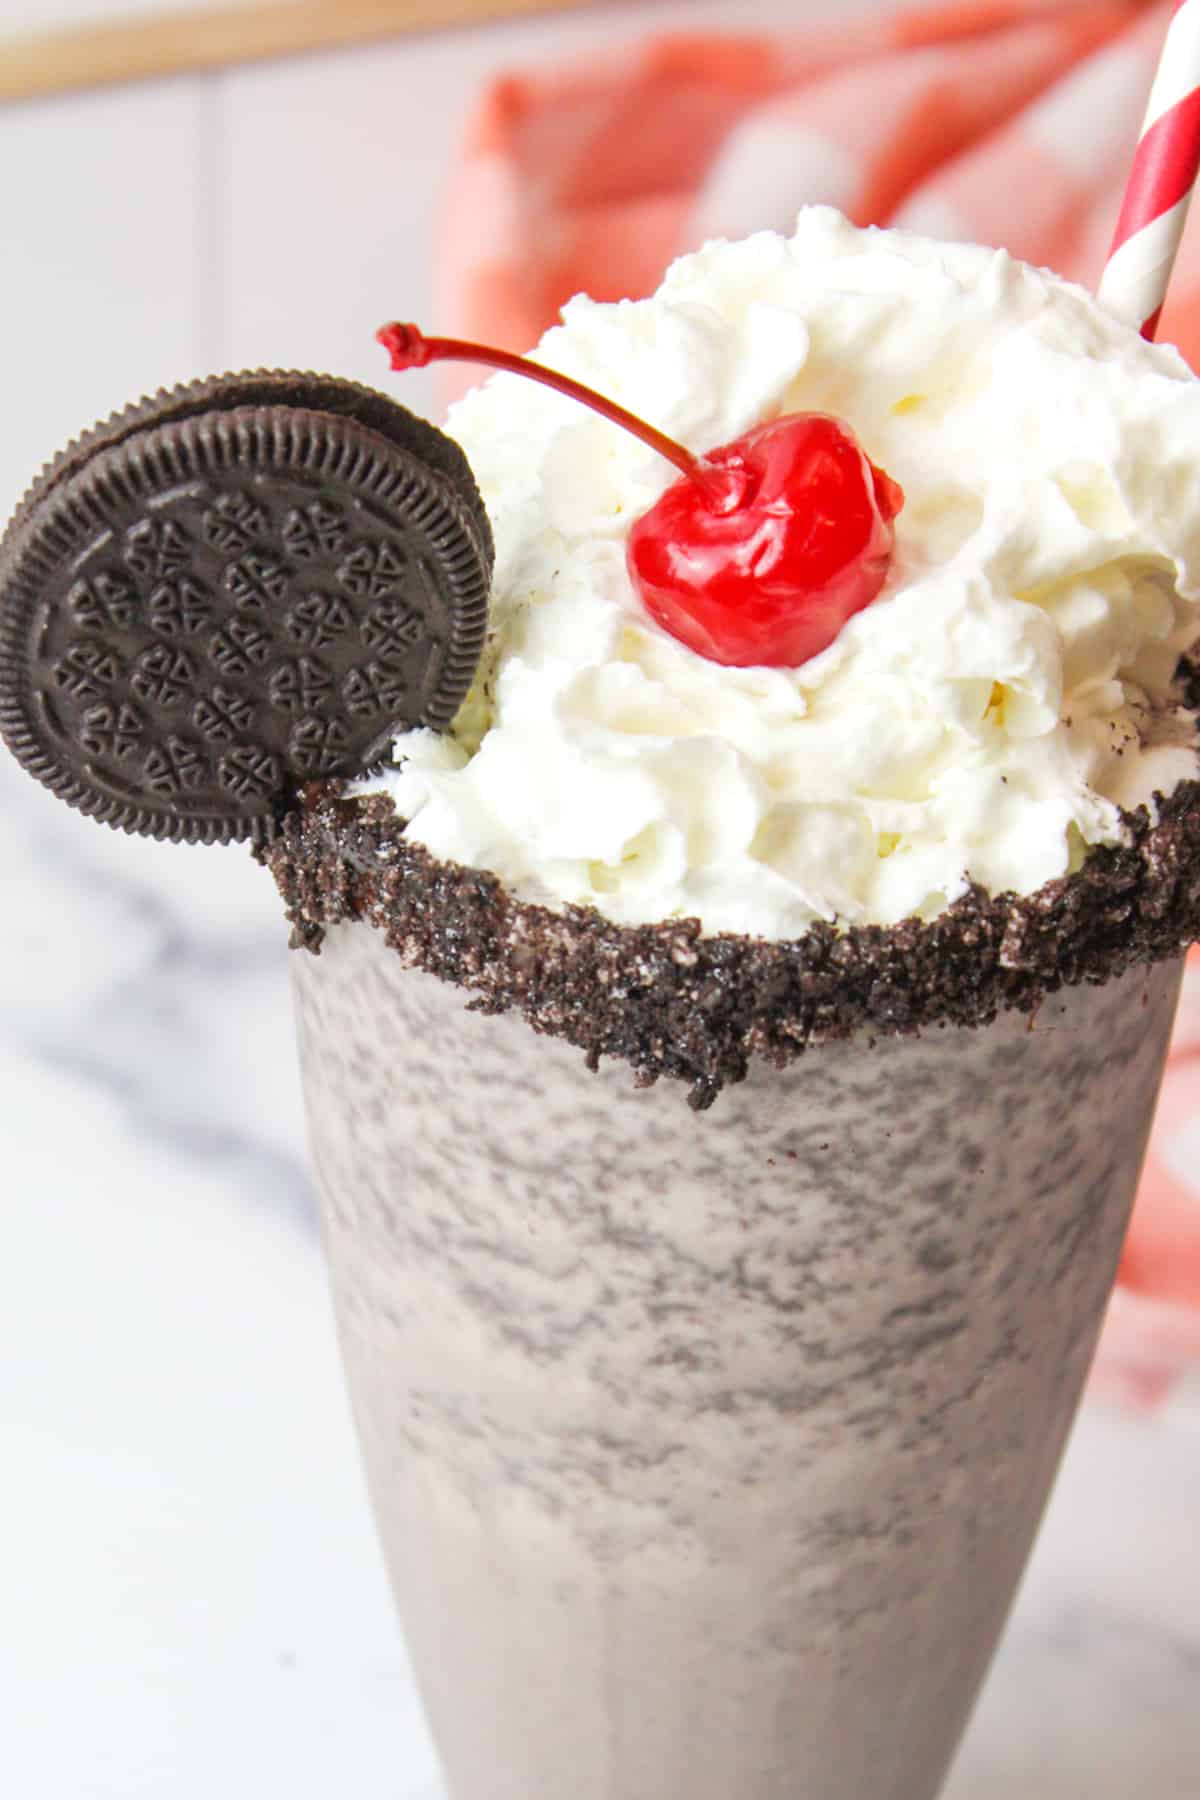 an upclose angled view of a glass of oreo milkshake garnished with whipped cream and a cherry and an oreo cookie